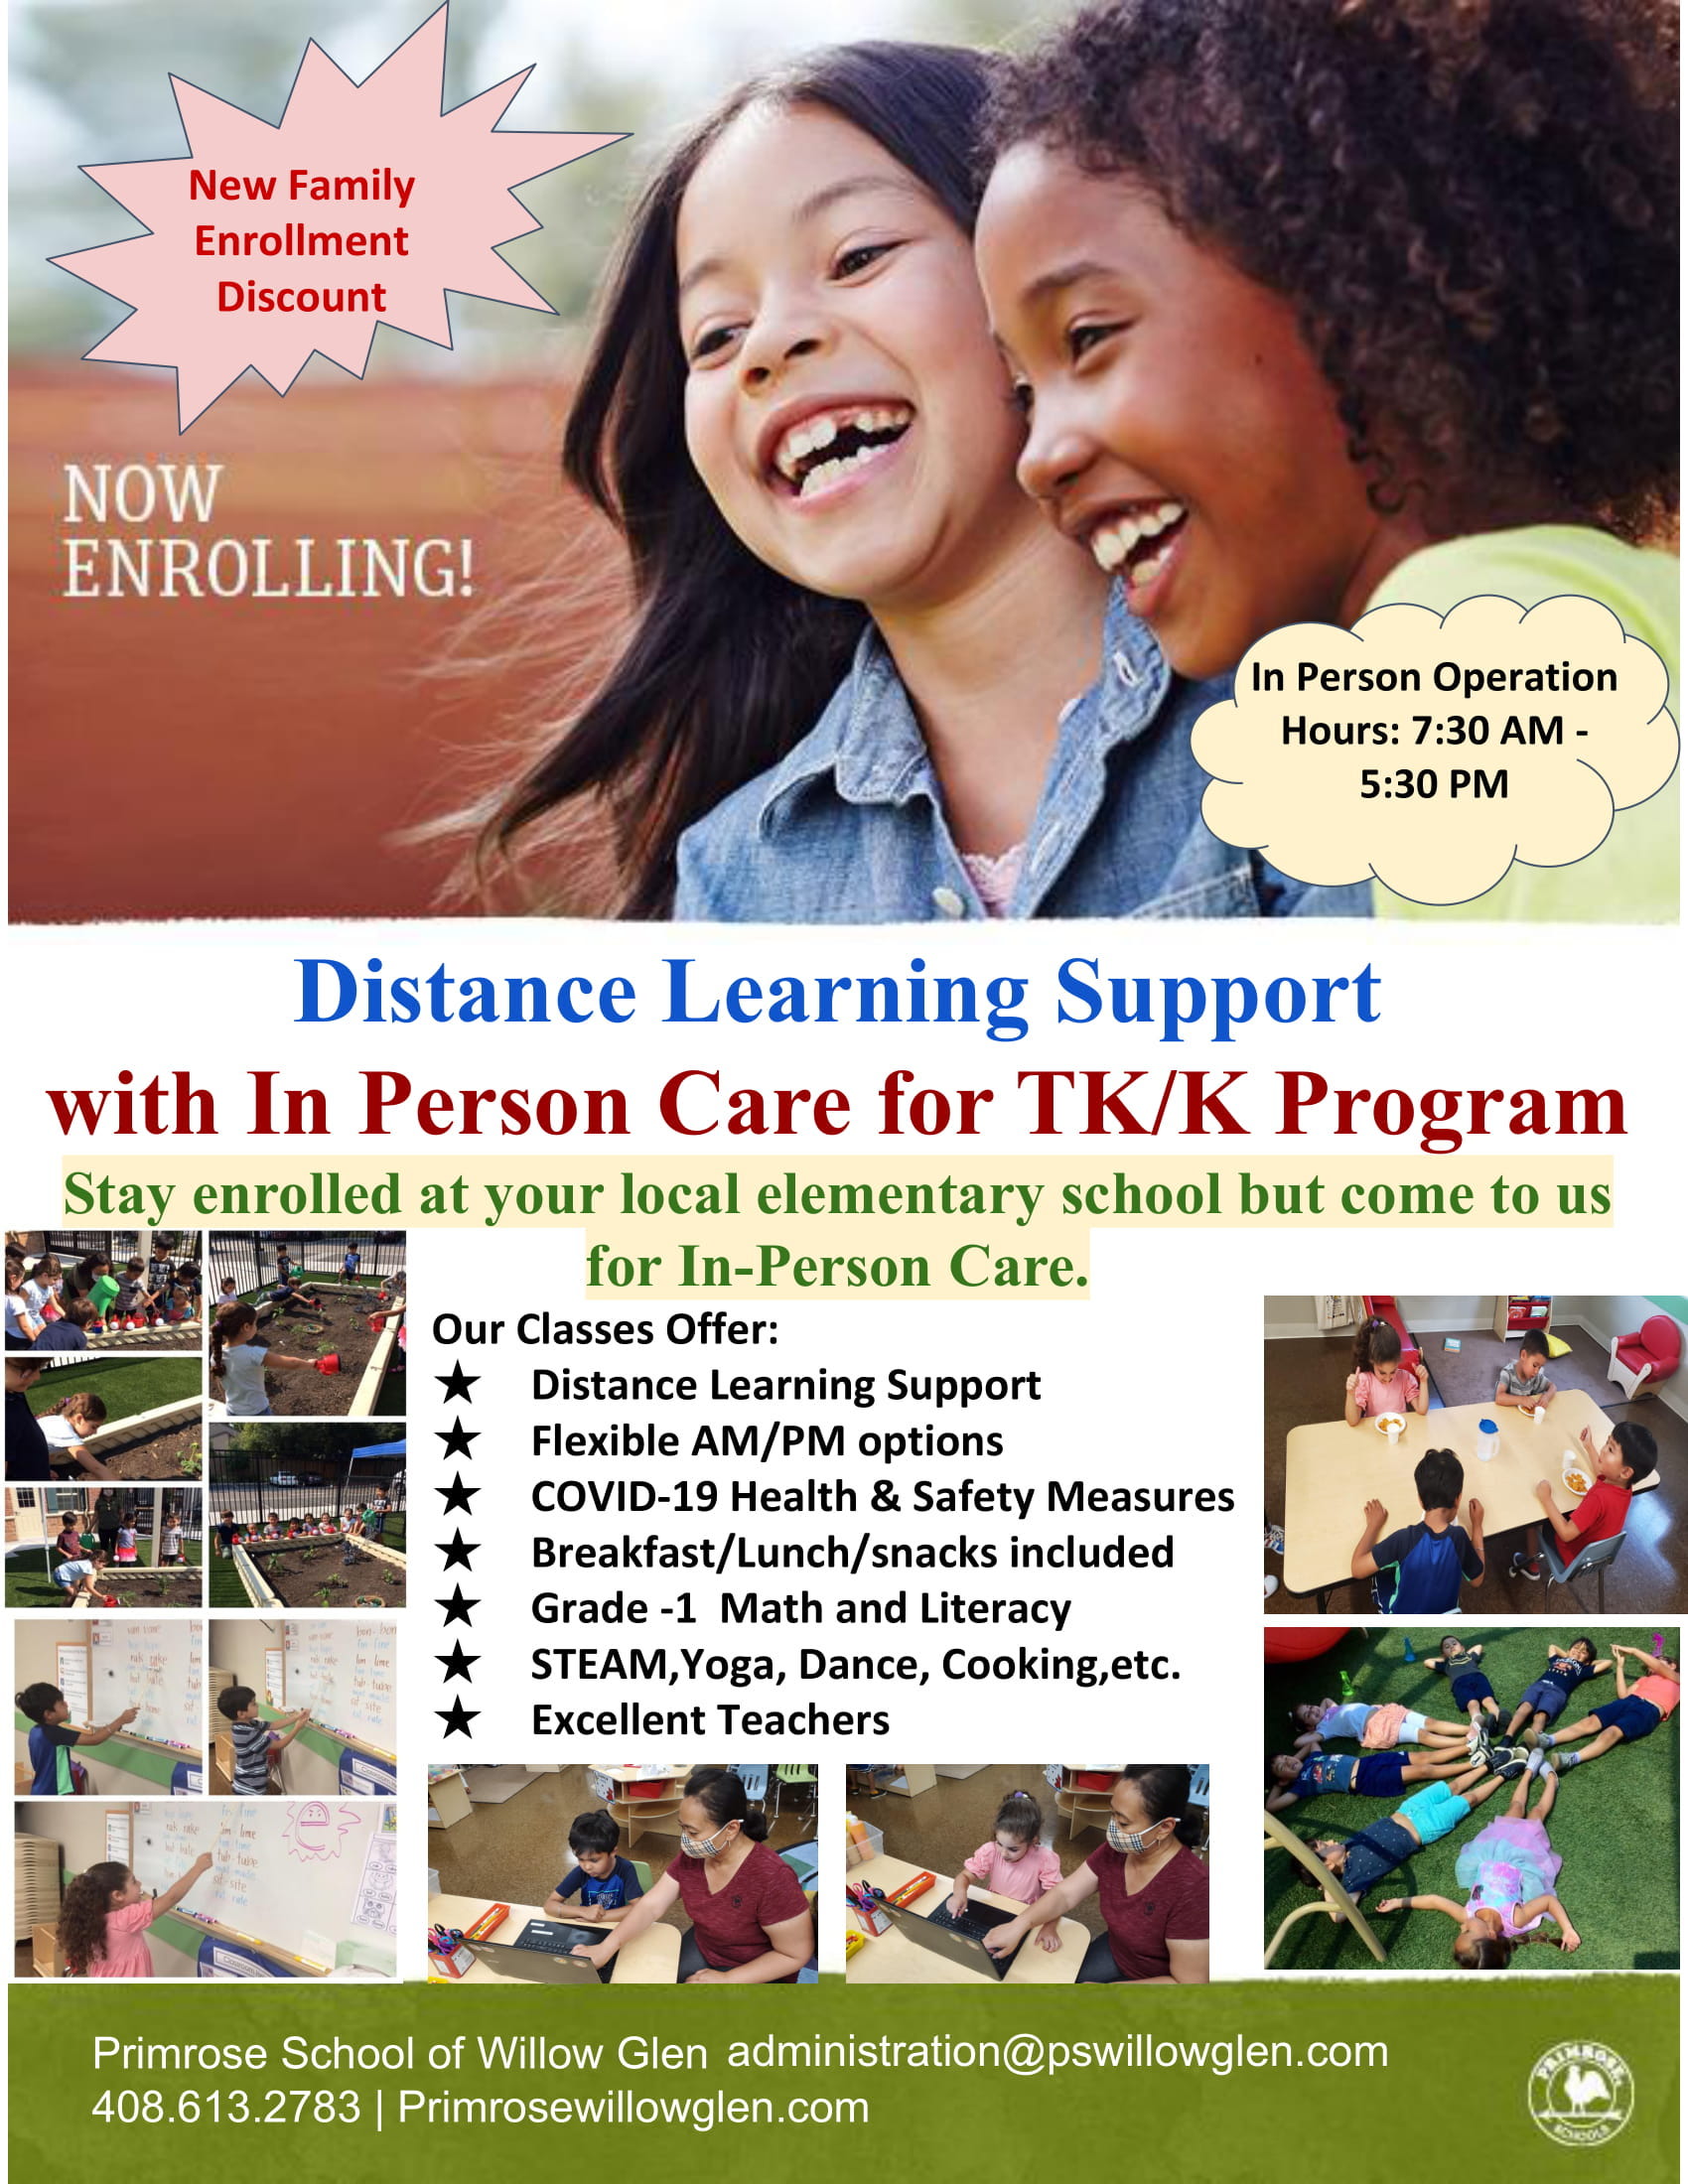 Distance Learning Support with In-Person Care